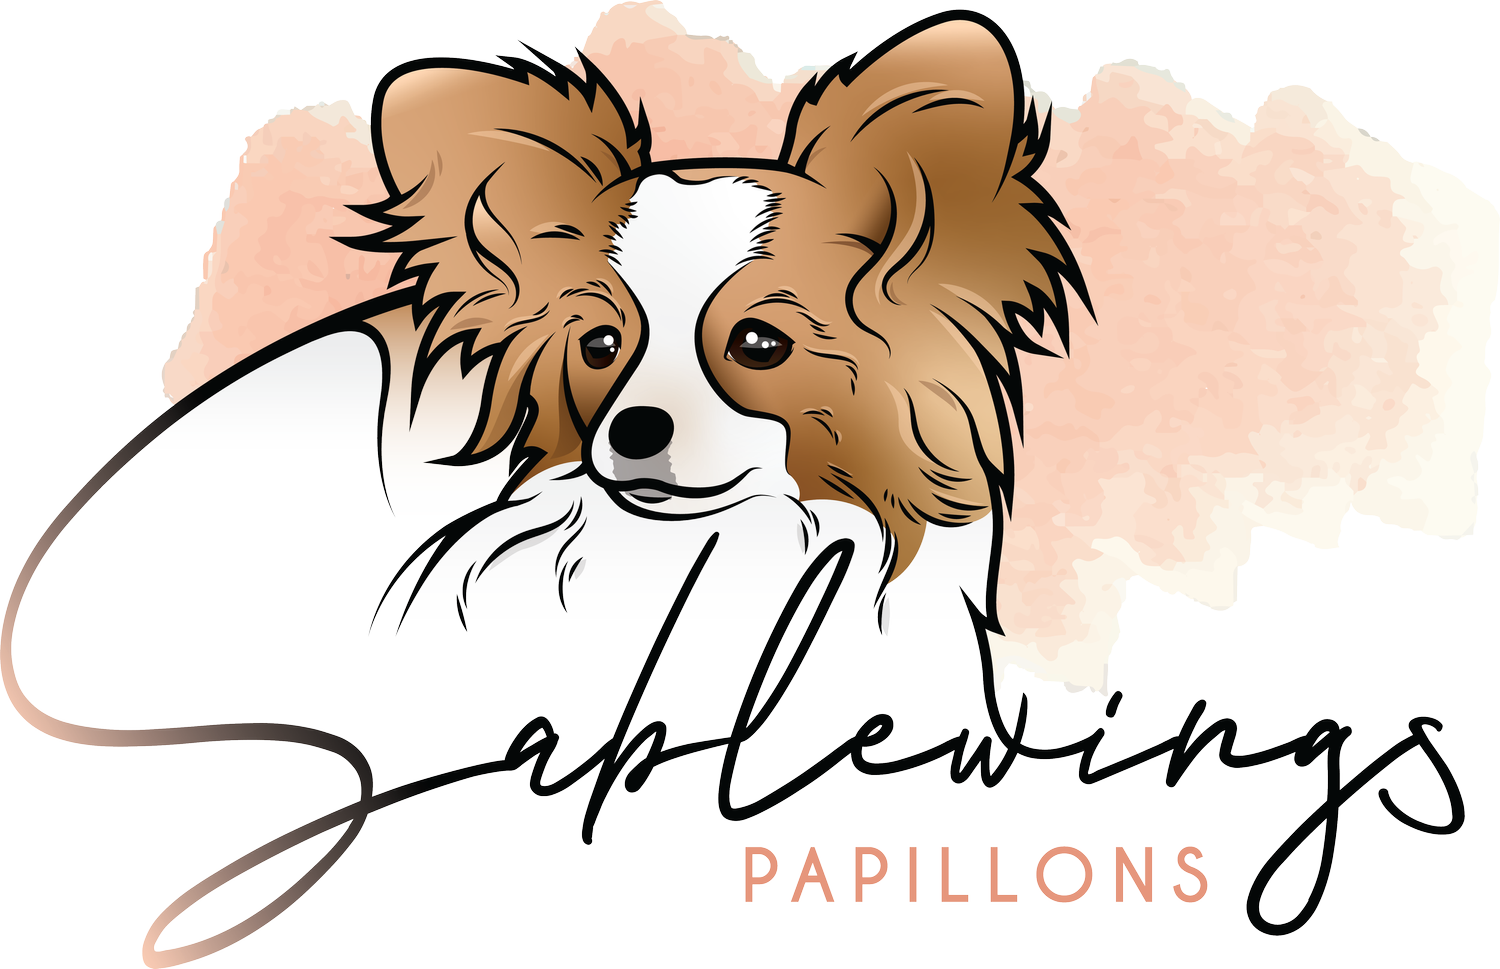 Sablewings Papillons